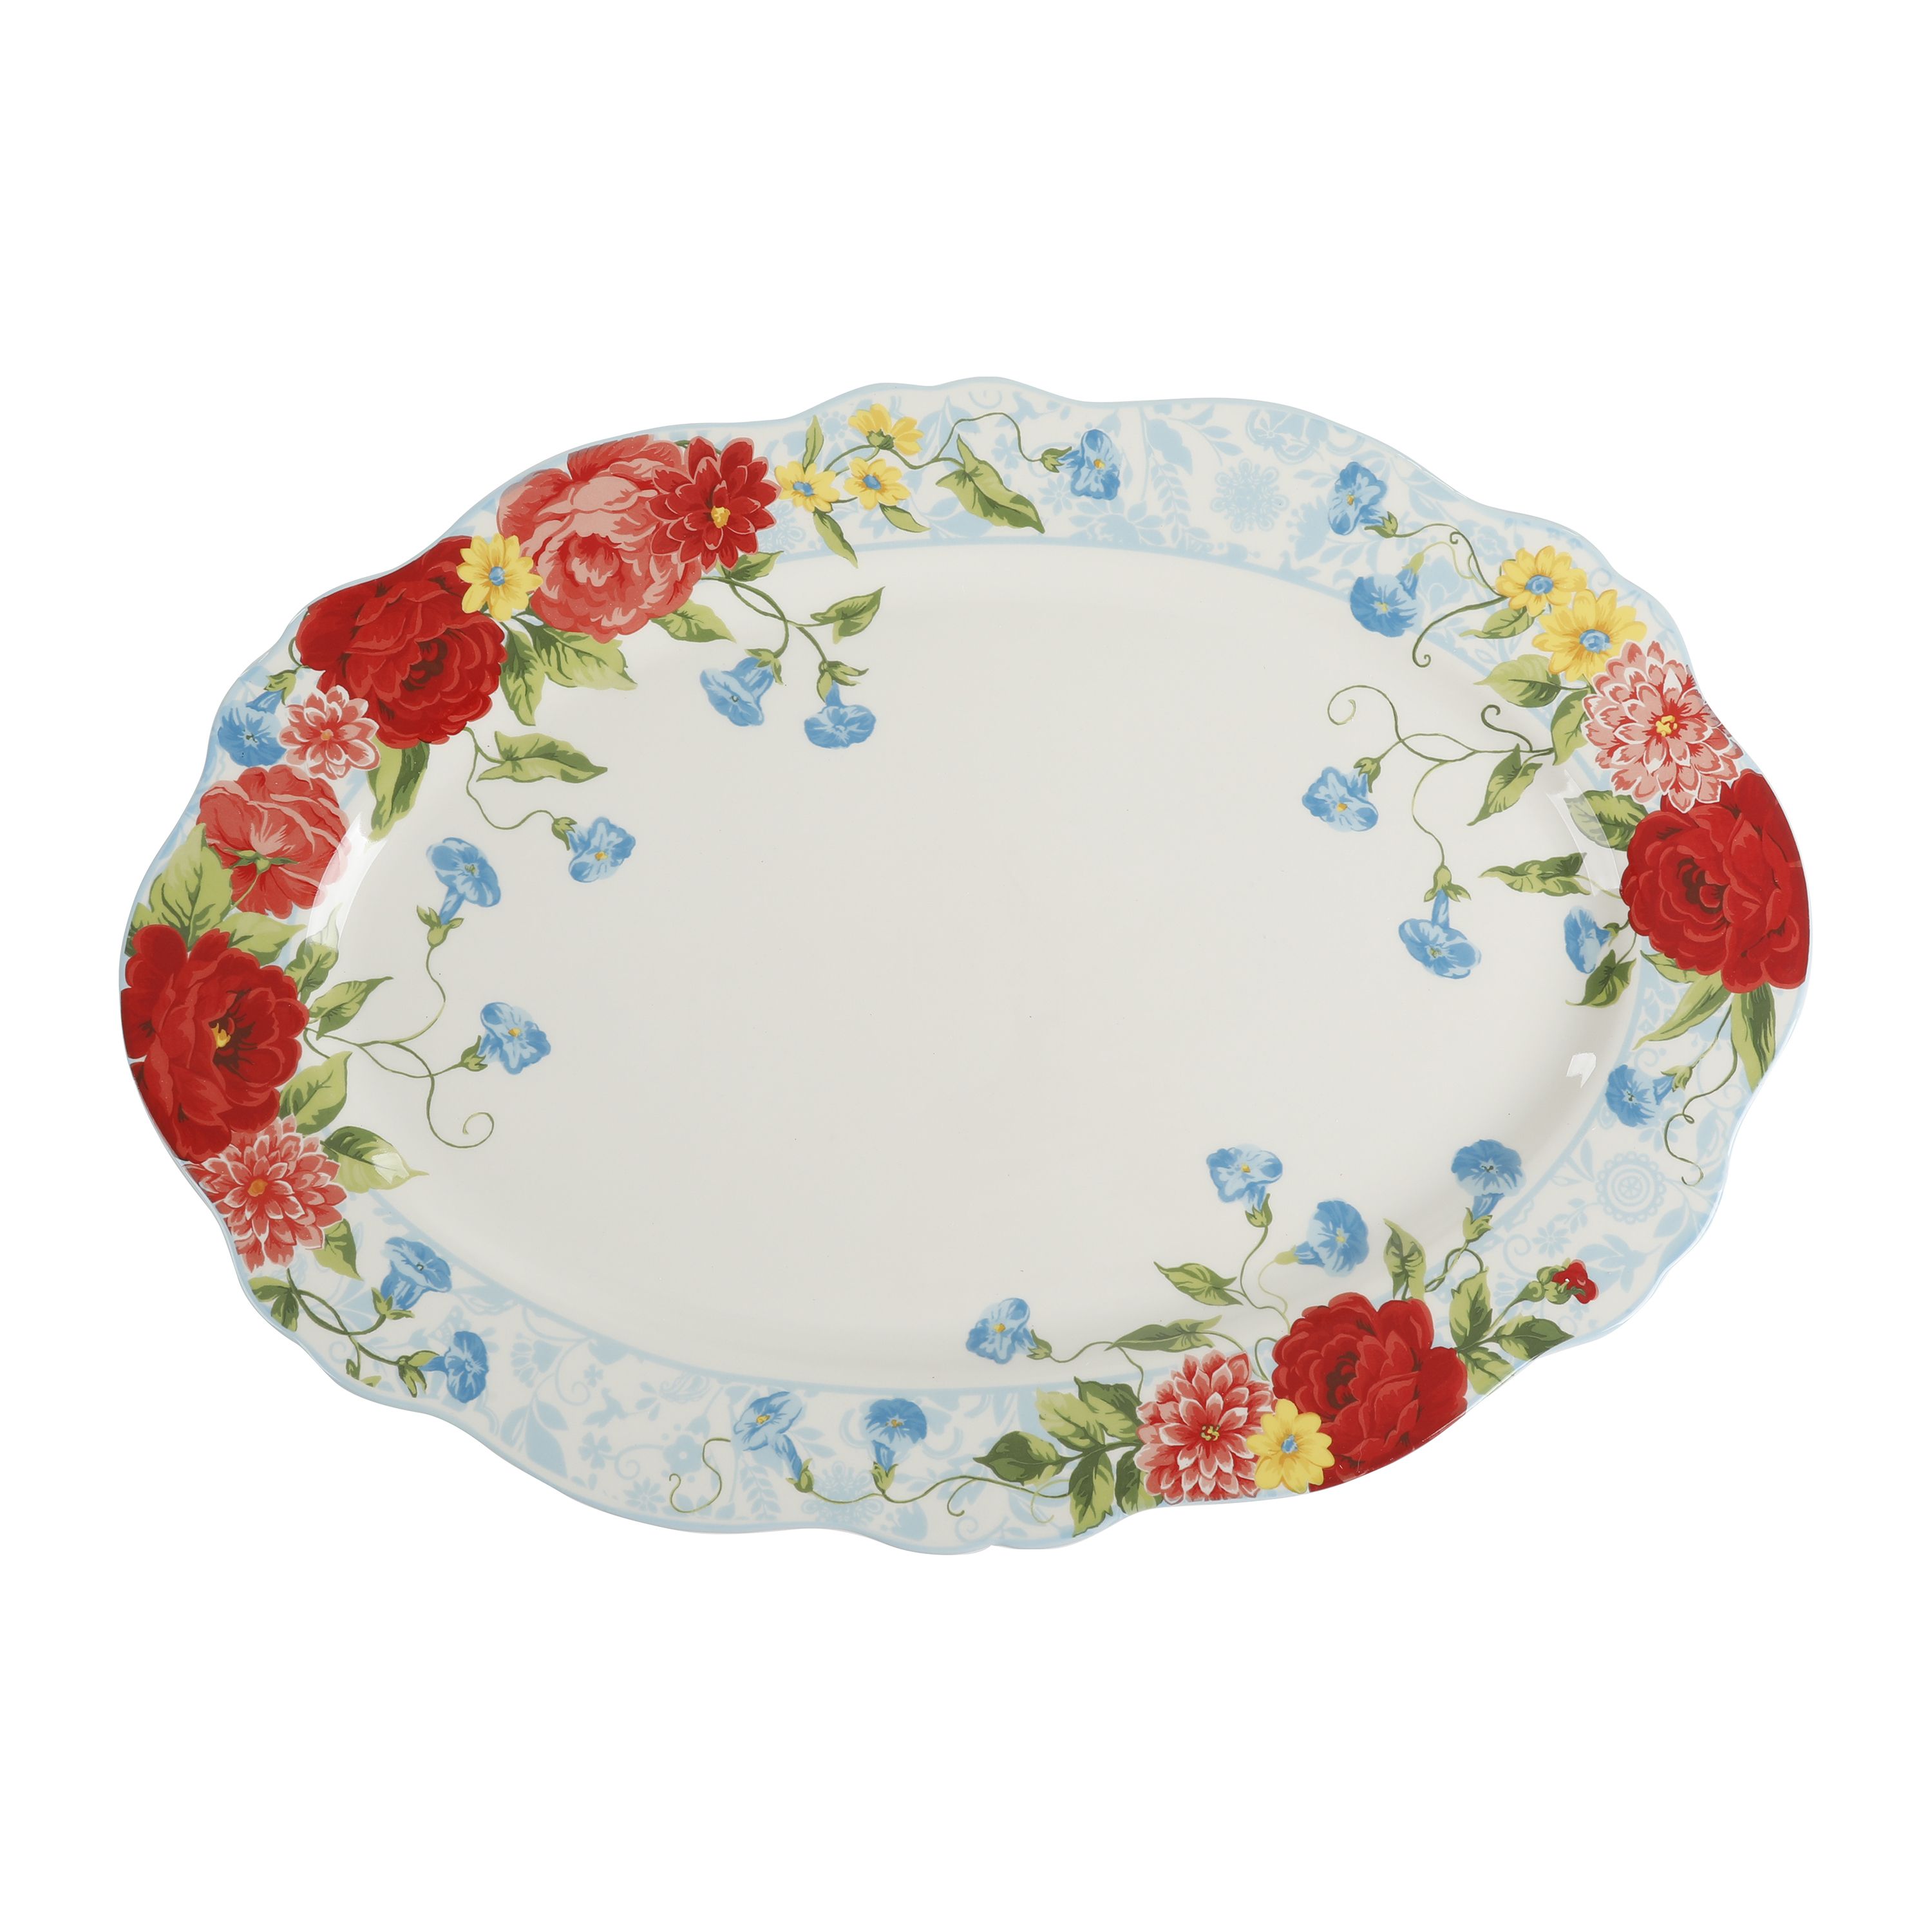 The Pioneer Woman Sweet Rose 21-Inch Oval Serving Platter